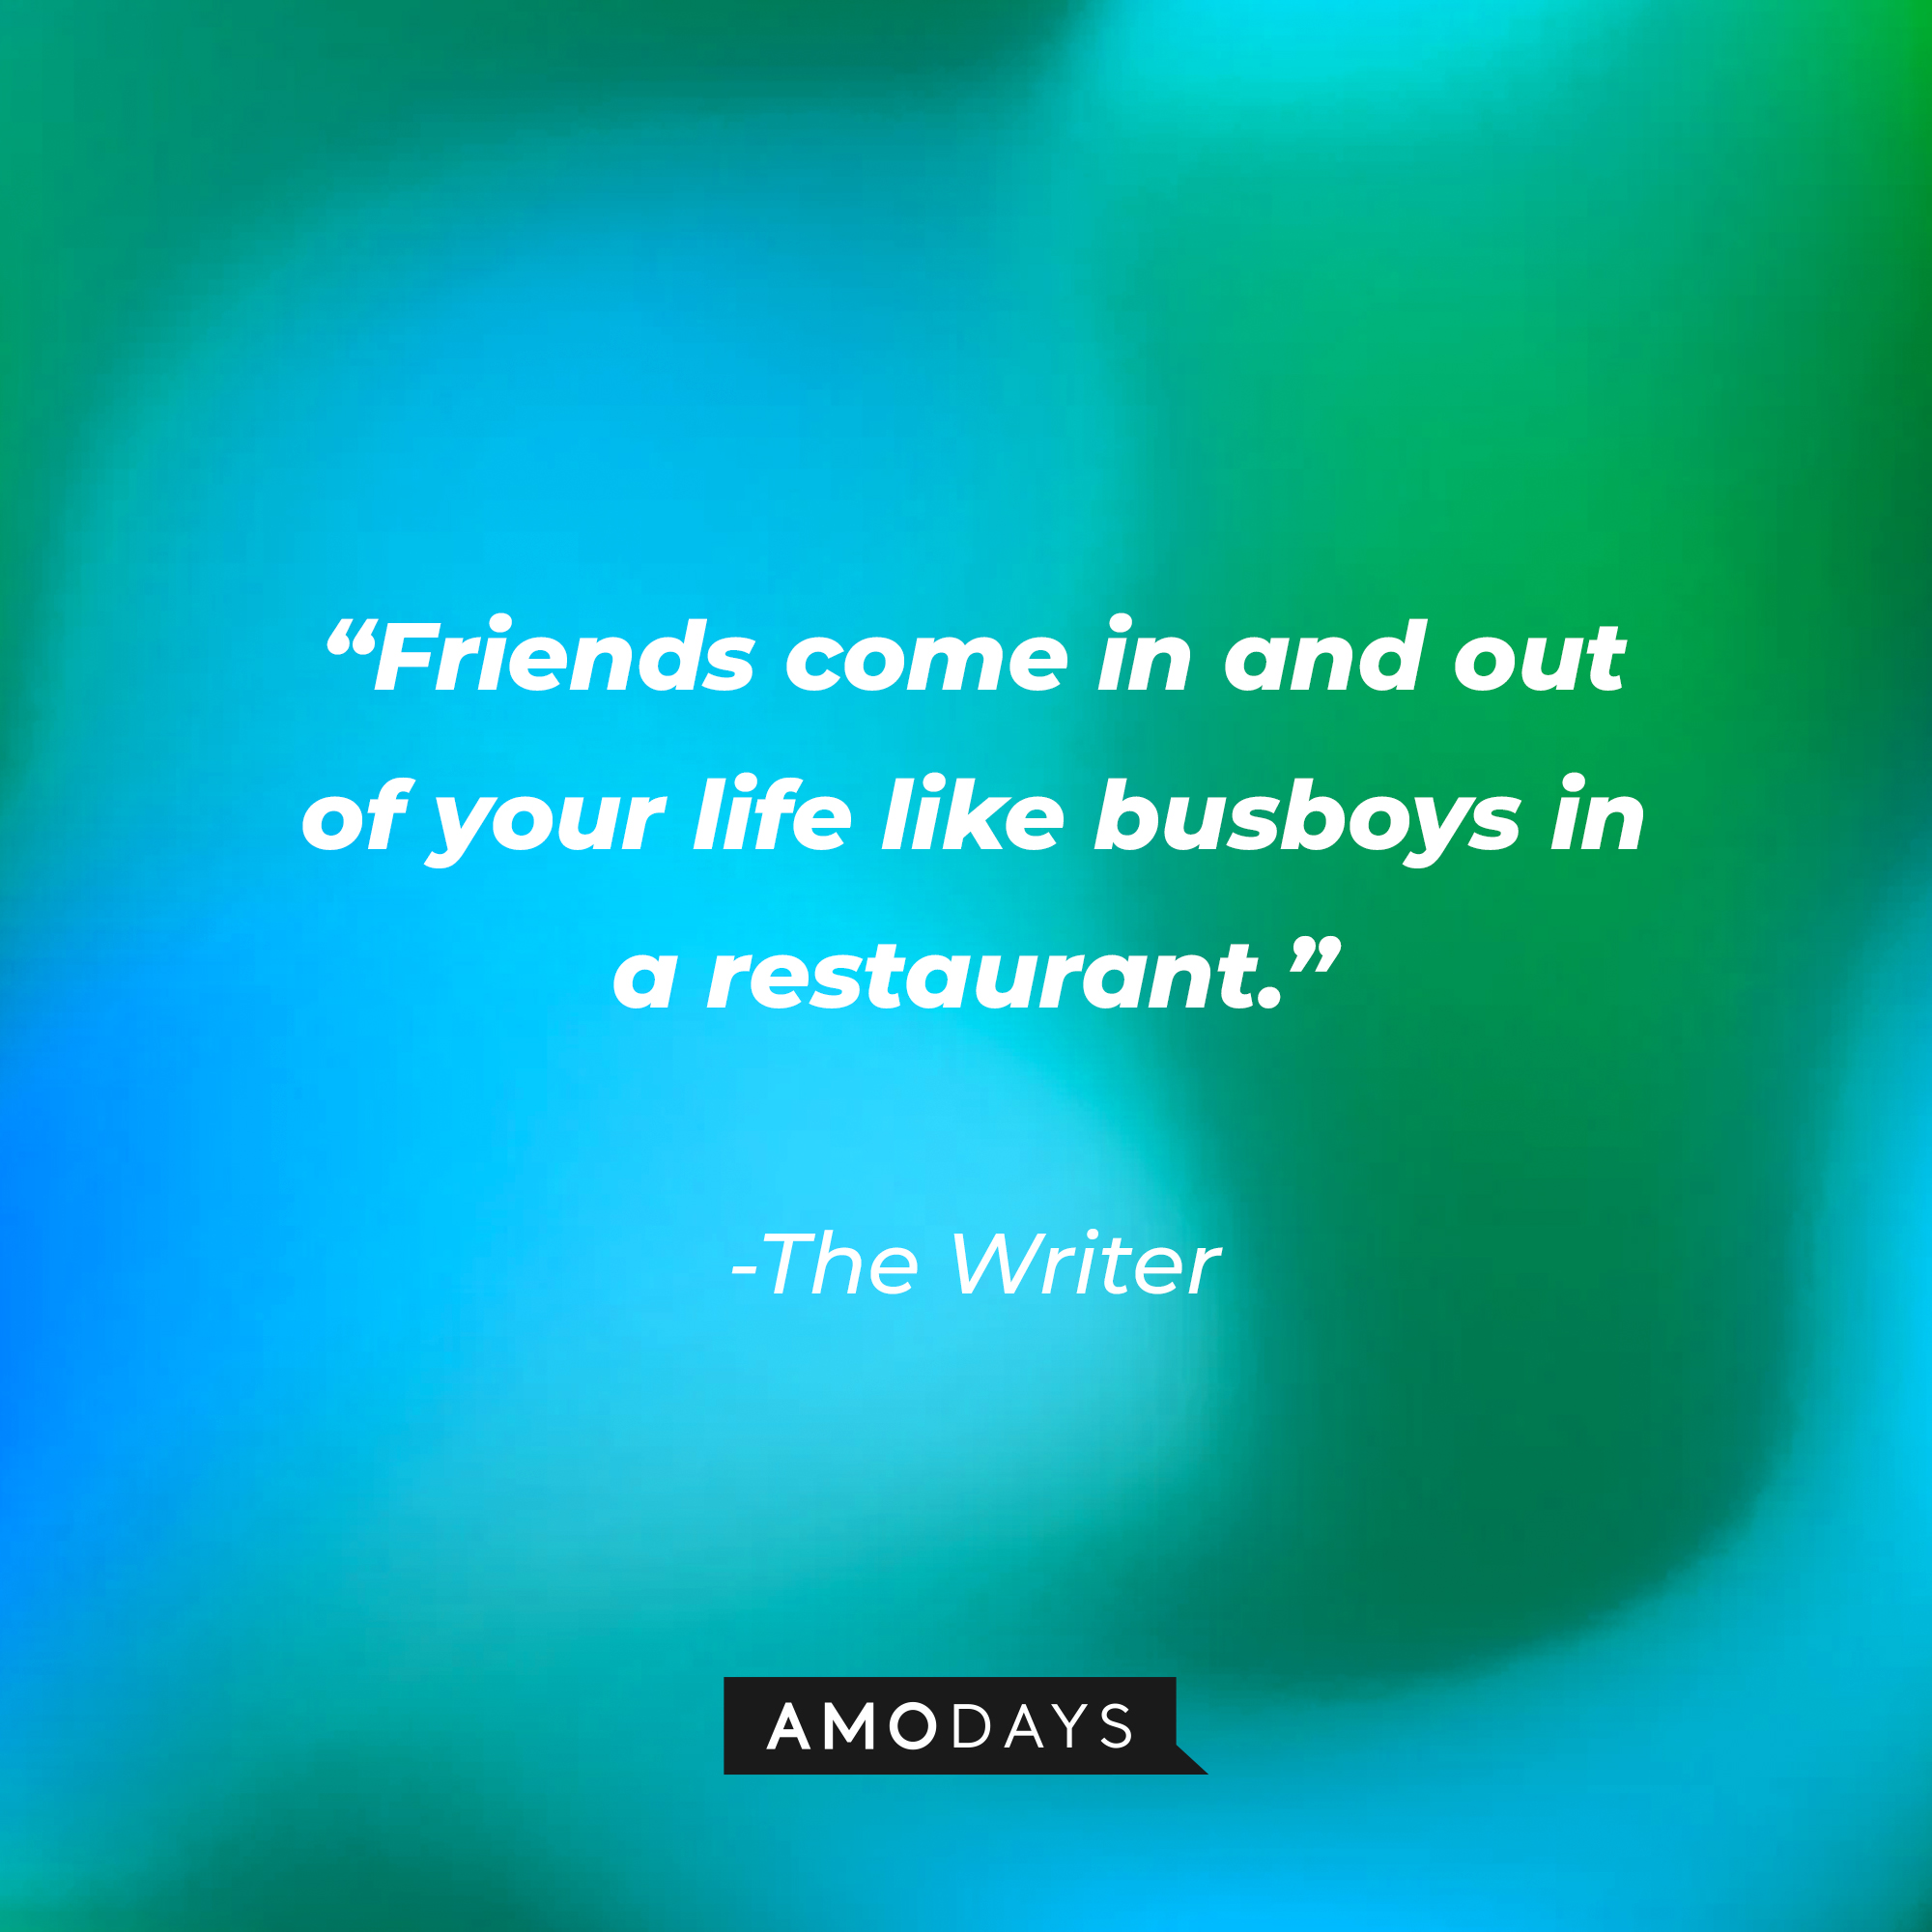 The Writer’s quote: “Friends come in and out of your life like busboys in a restaurant.” | Source: AmoDays